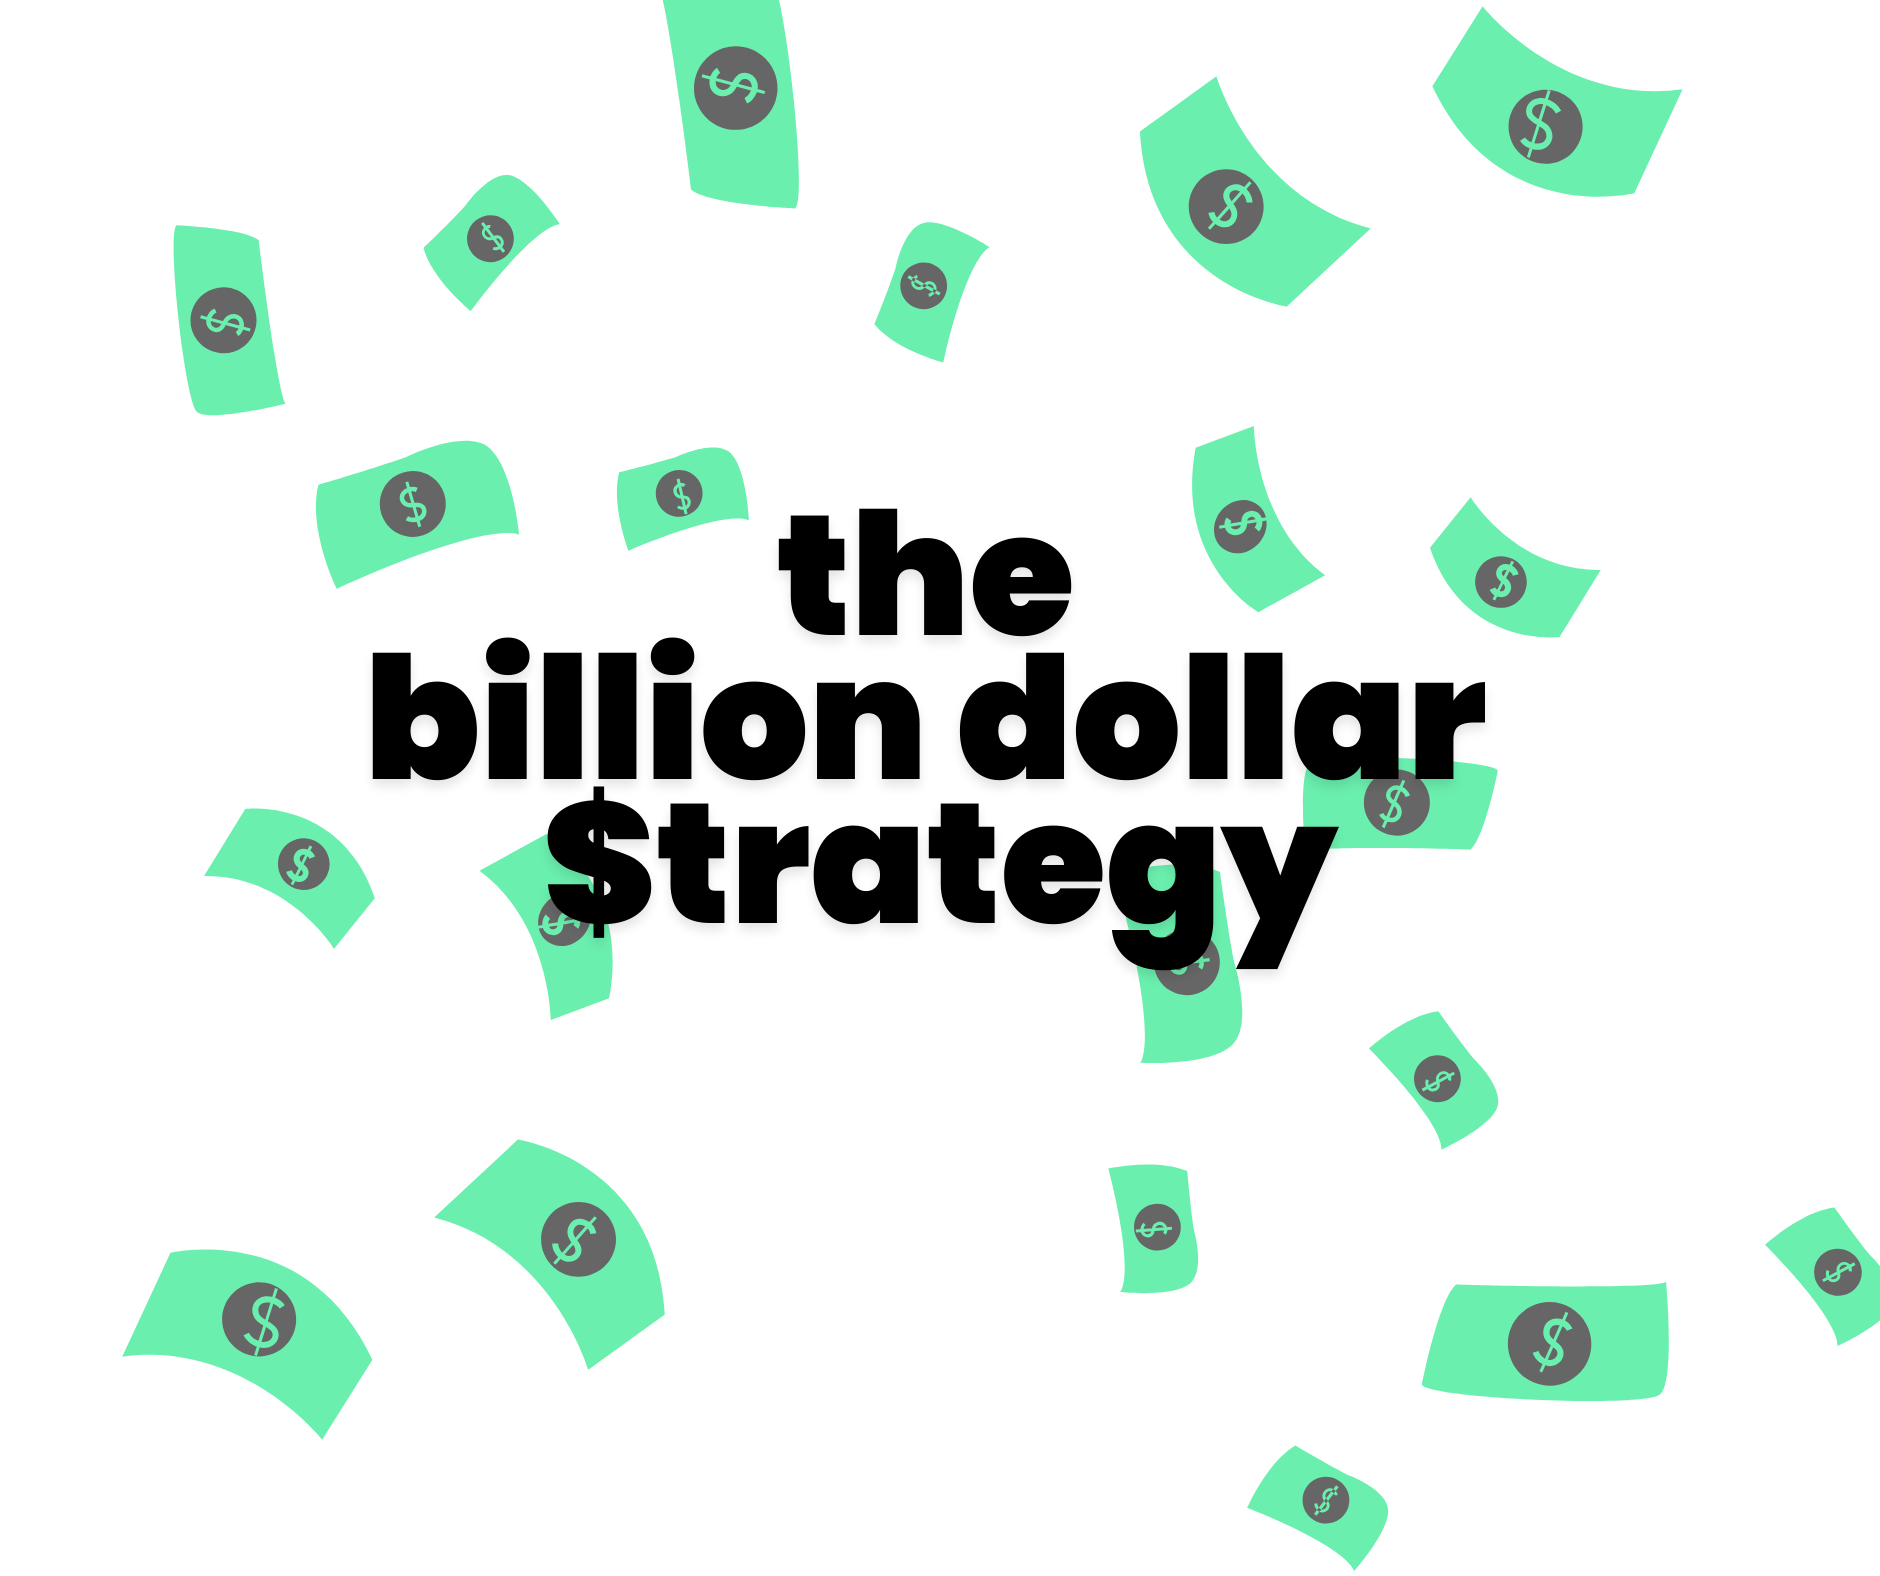 Featured image for “Billion dollar strategy”